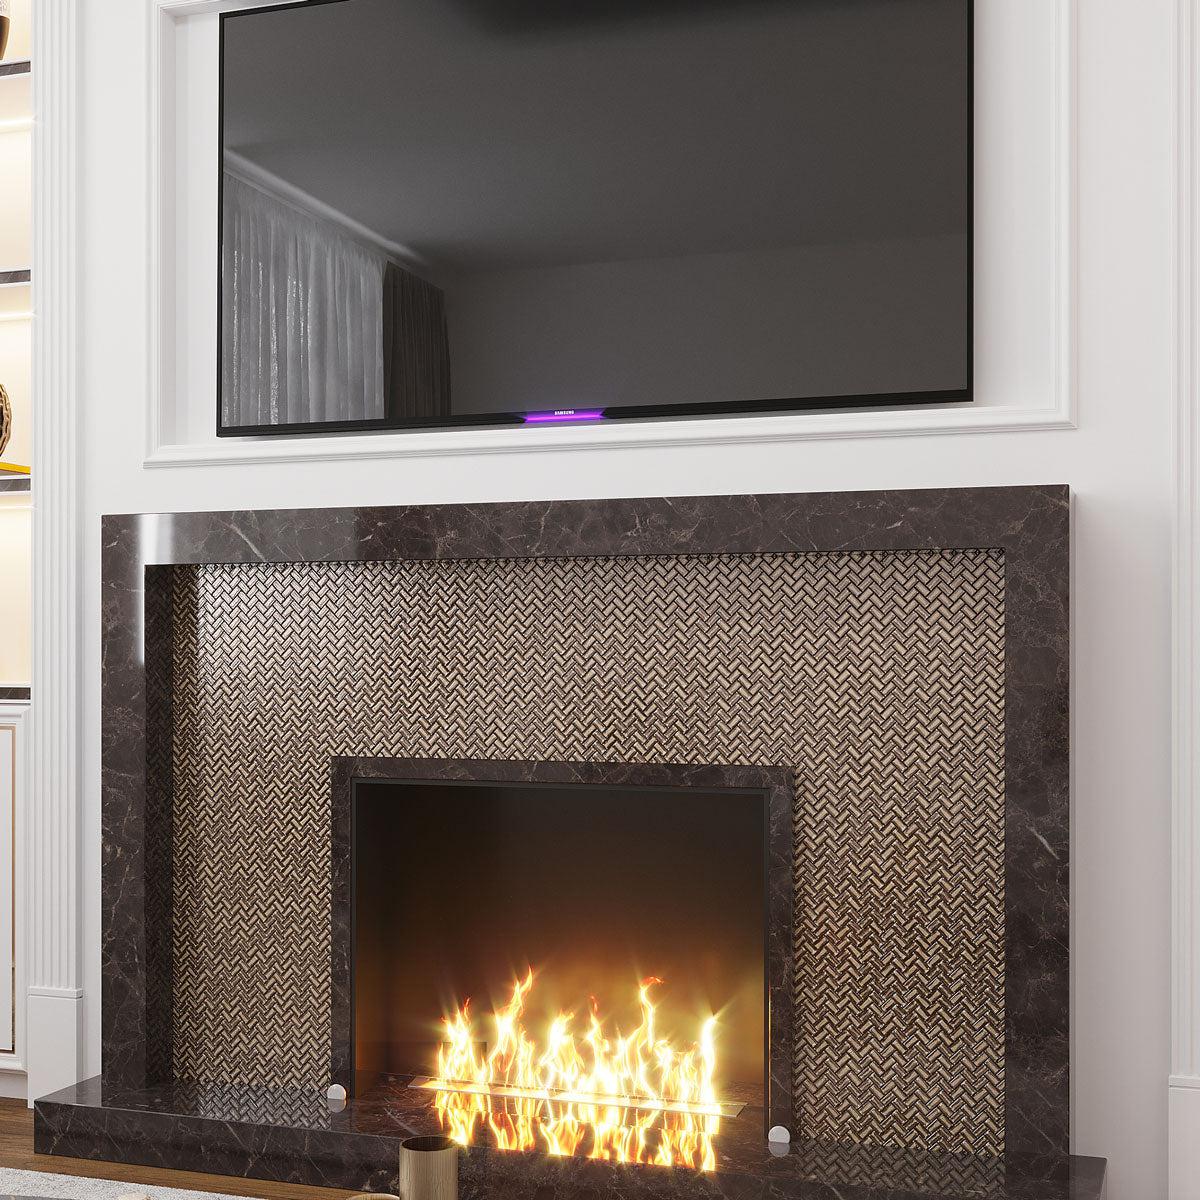 Fireplace surround with Gold Herringbone Mosaic Tile